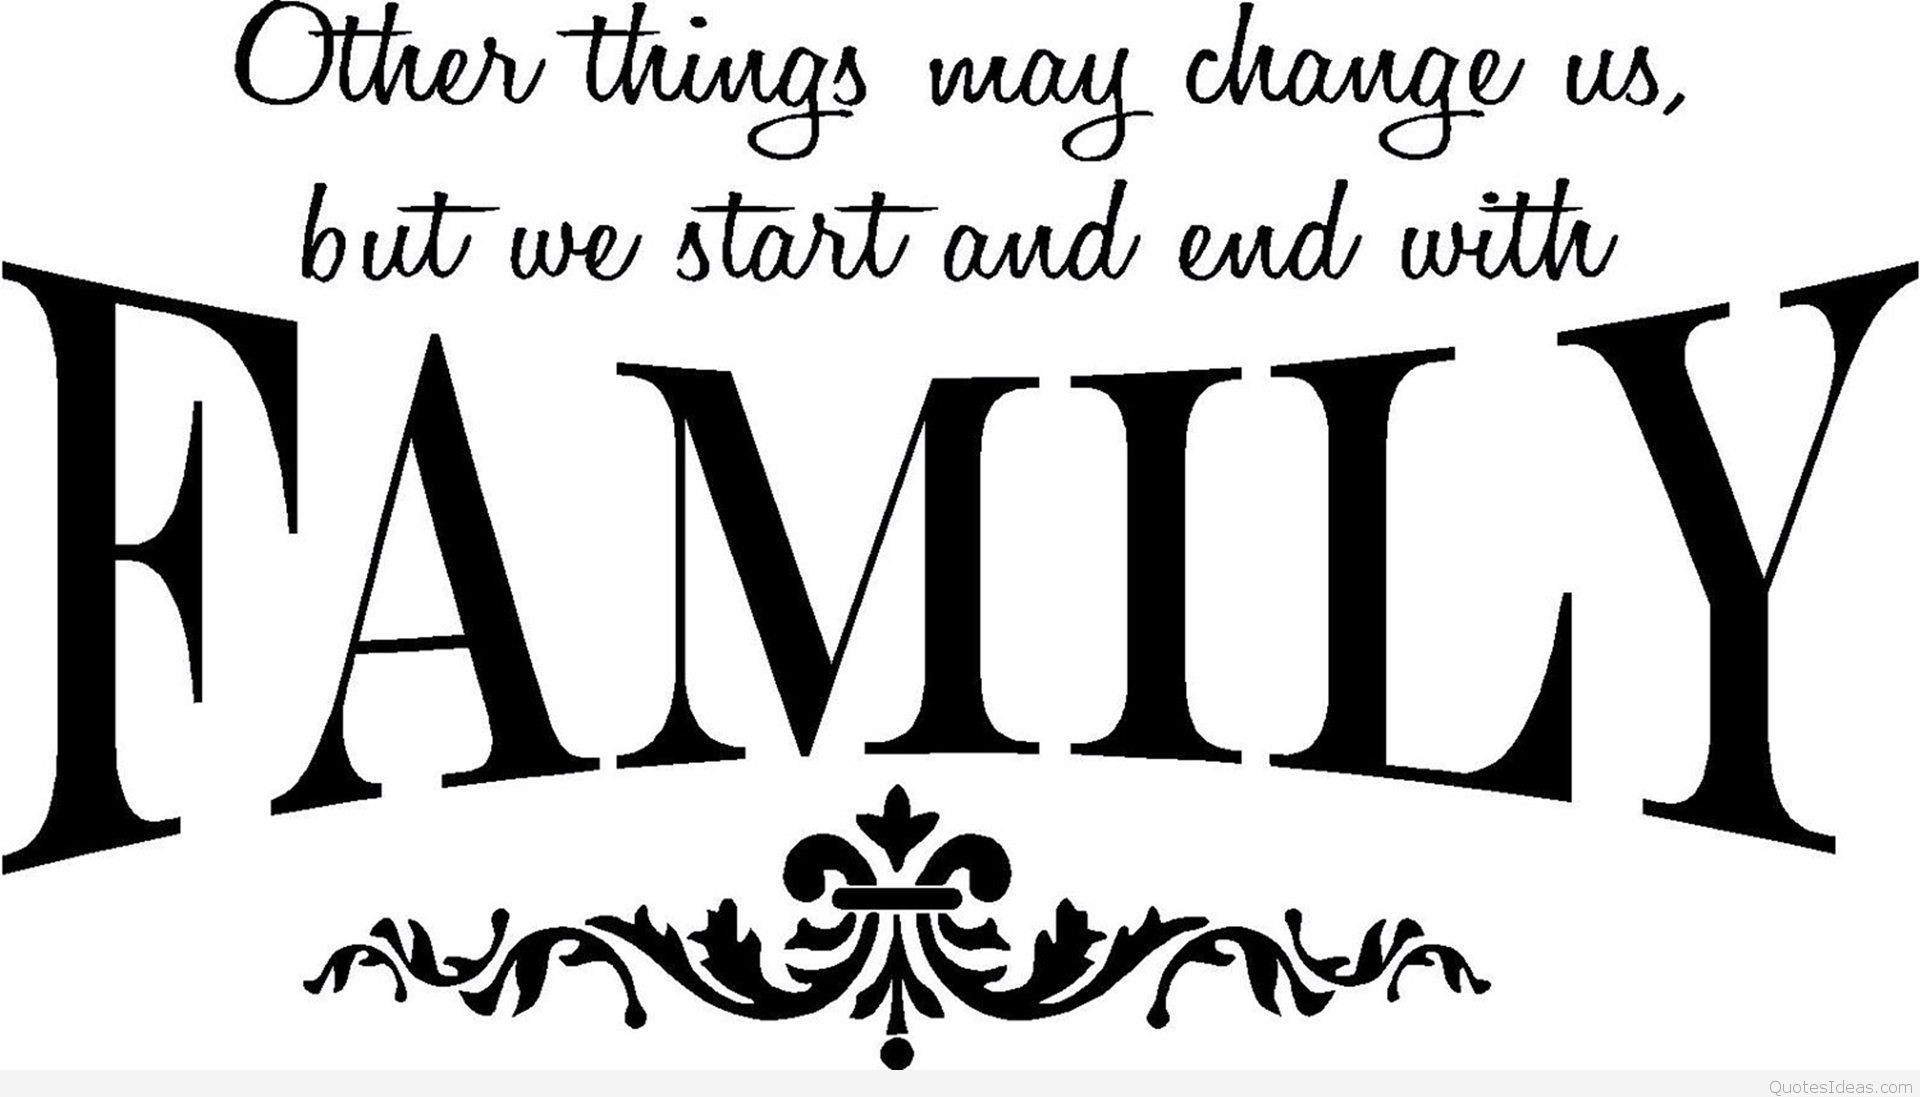 Inspirational Quotes For Families
 Cute cover family quote 2015 inspiring